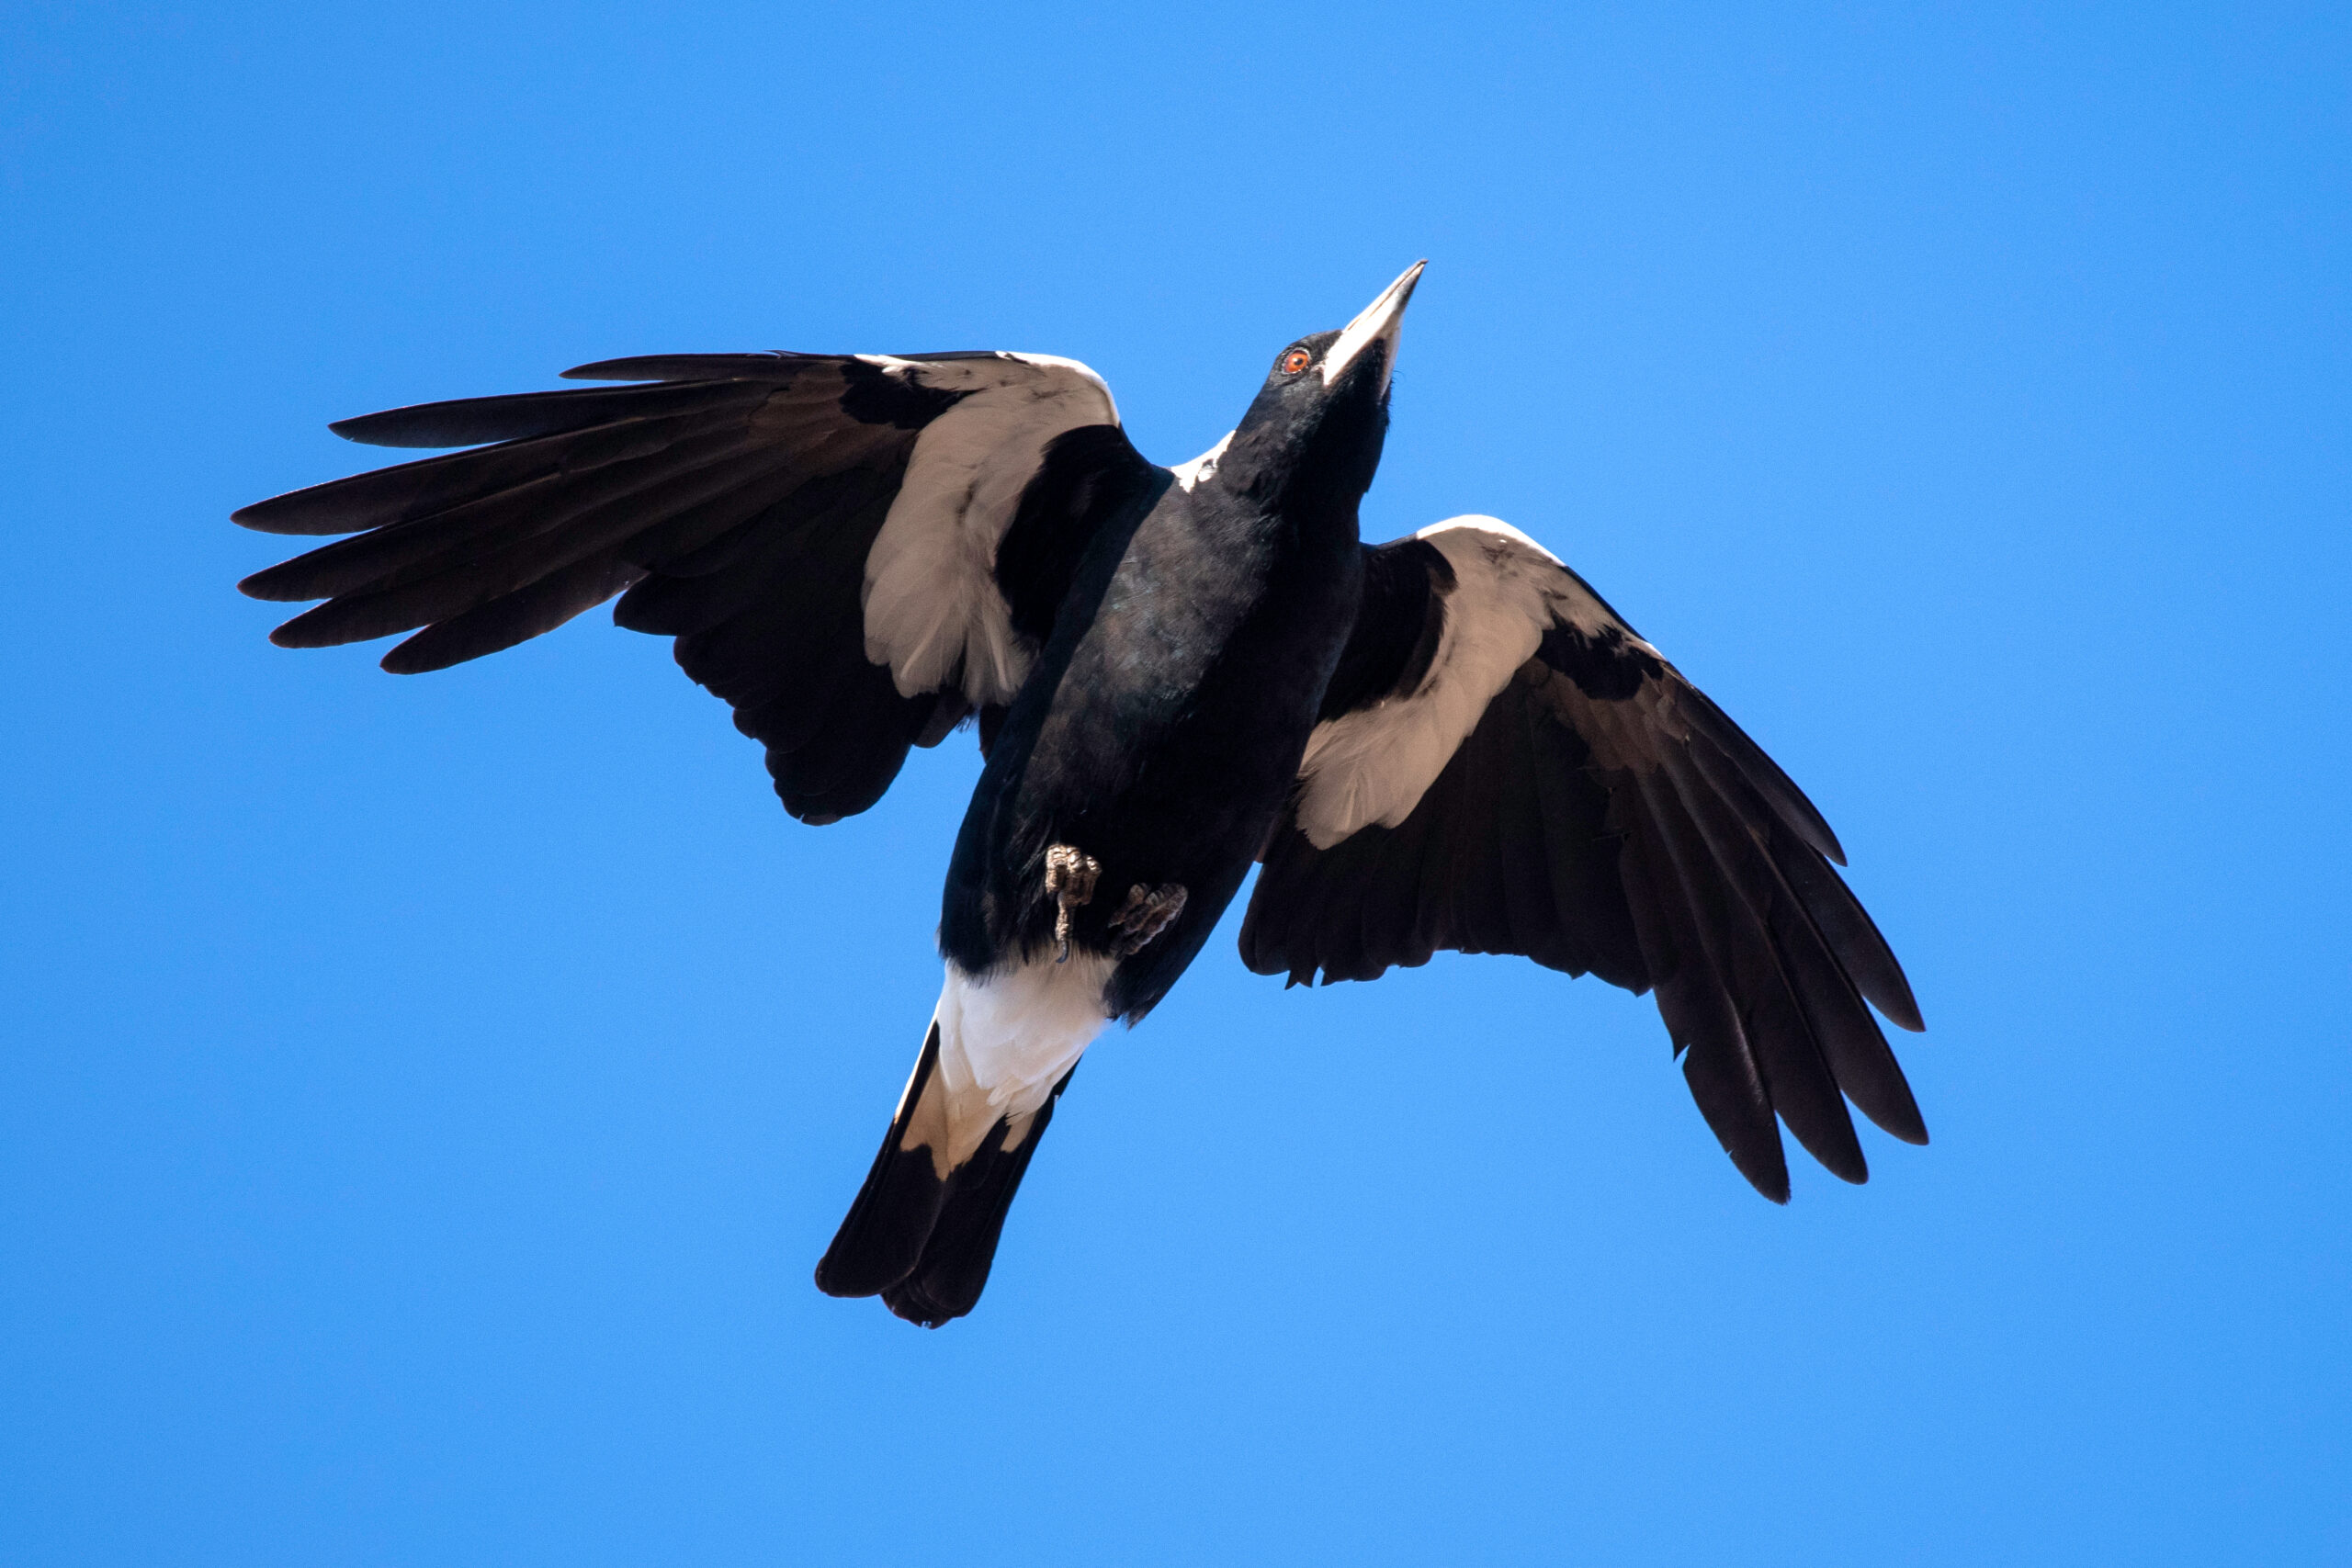 This is a photograph of a flying magpie. The photo shows the magpie’s wings stretched out in flight. The bird is mostly black with a white beak, and patches of white on its wings and tail. It has a red beady eye. The sky is blue.